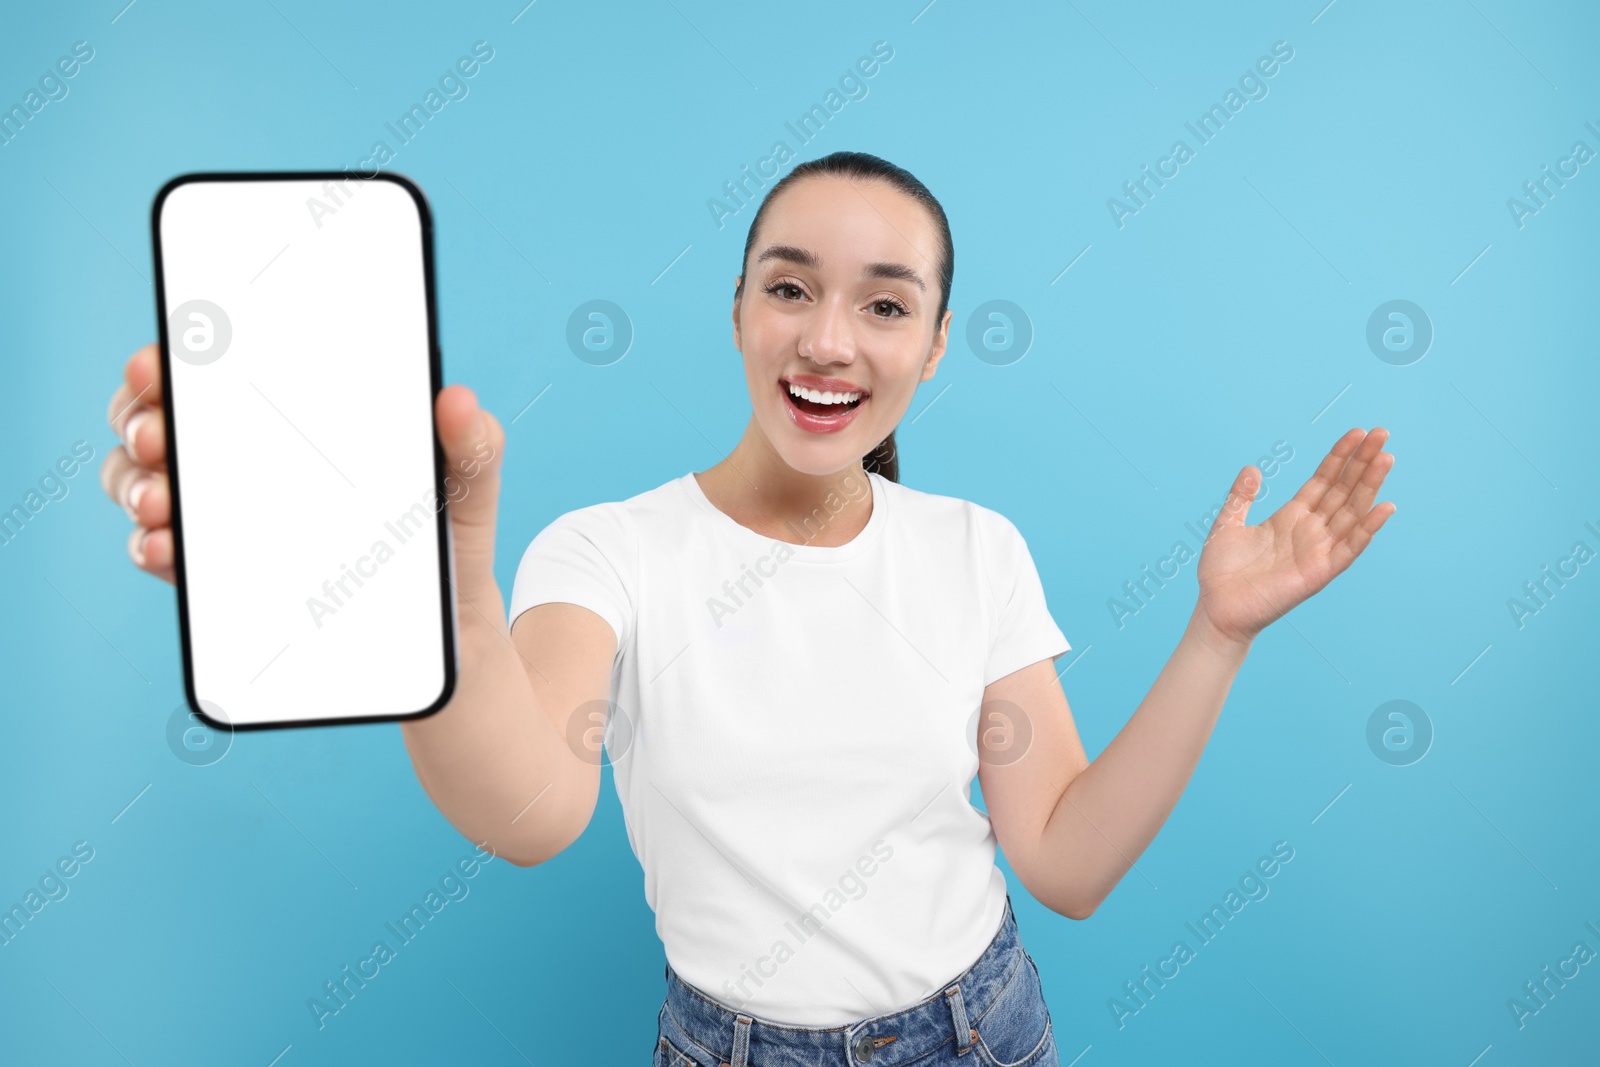 Photo of Surprised woman showing smartphone in hand on light blue background